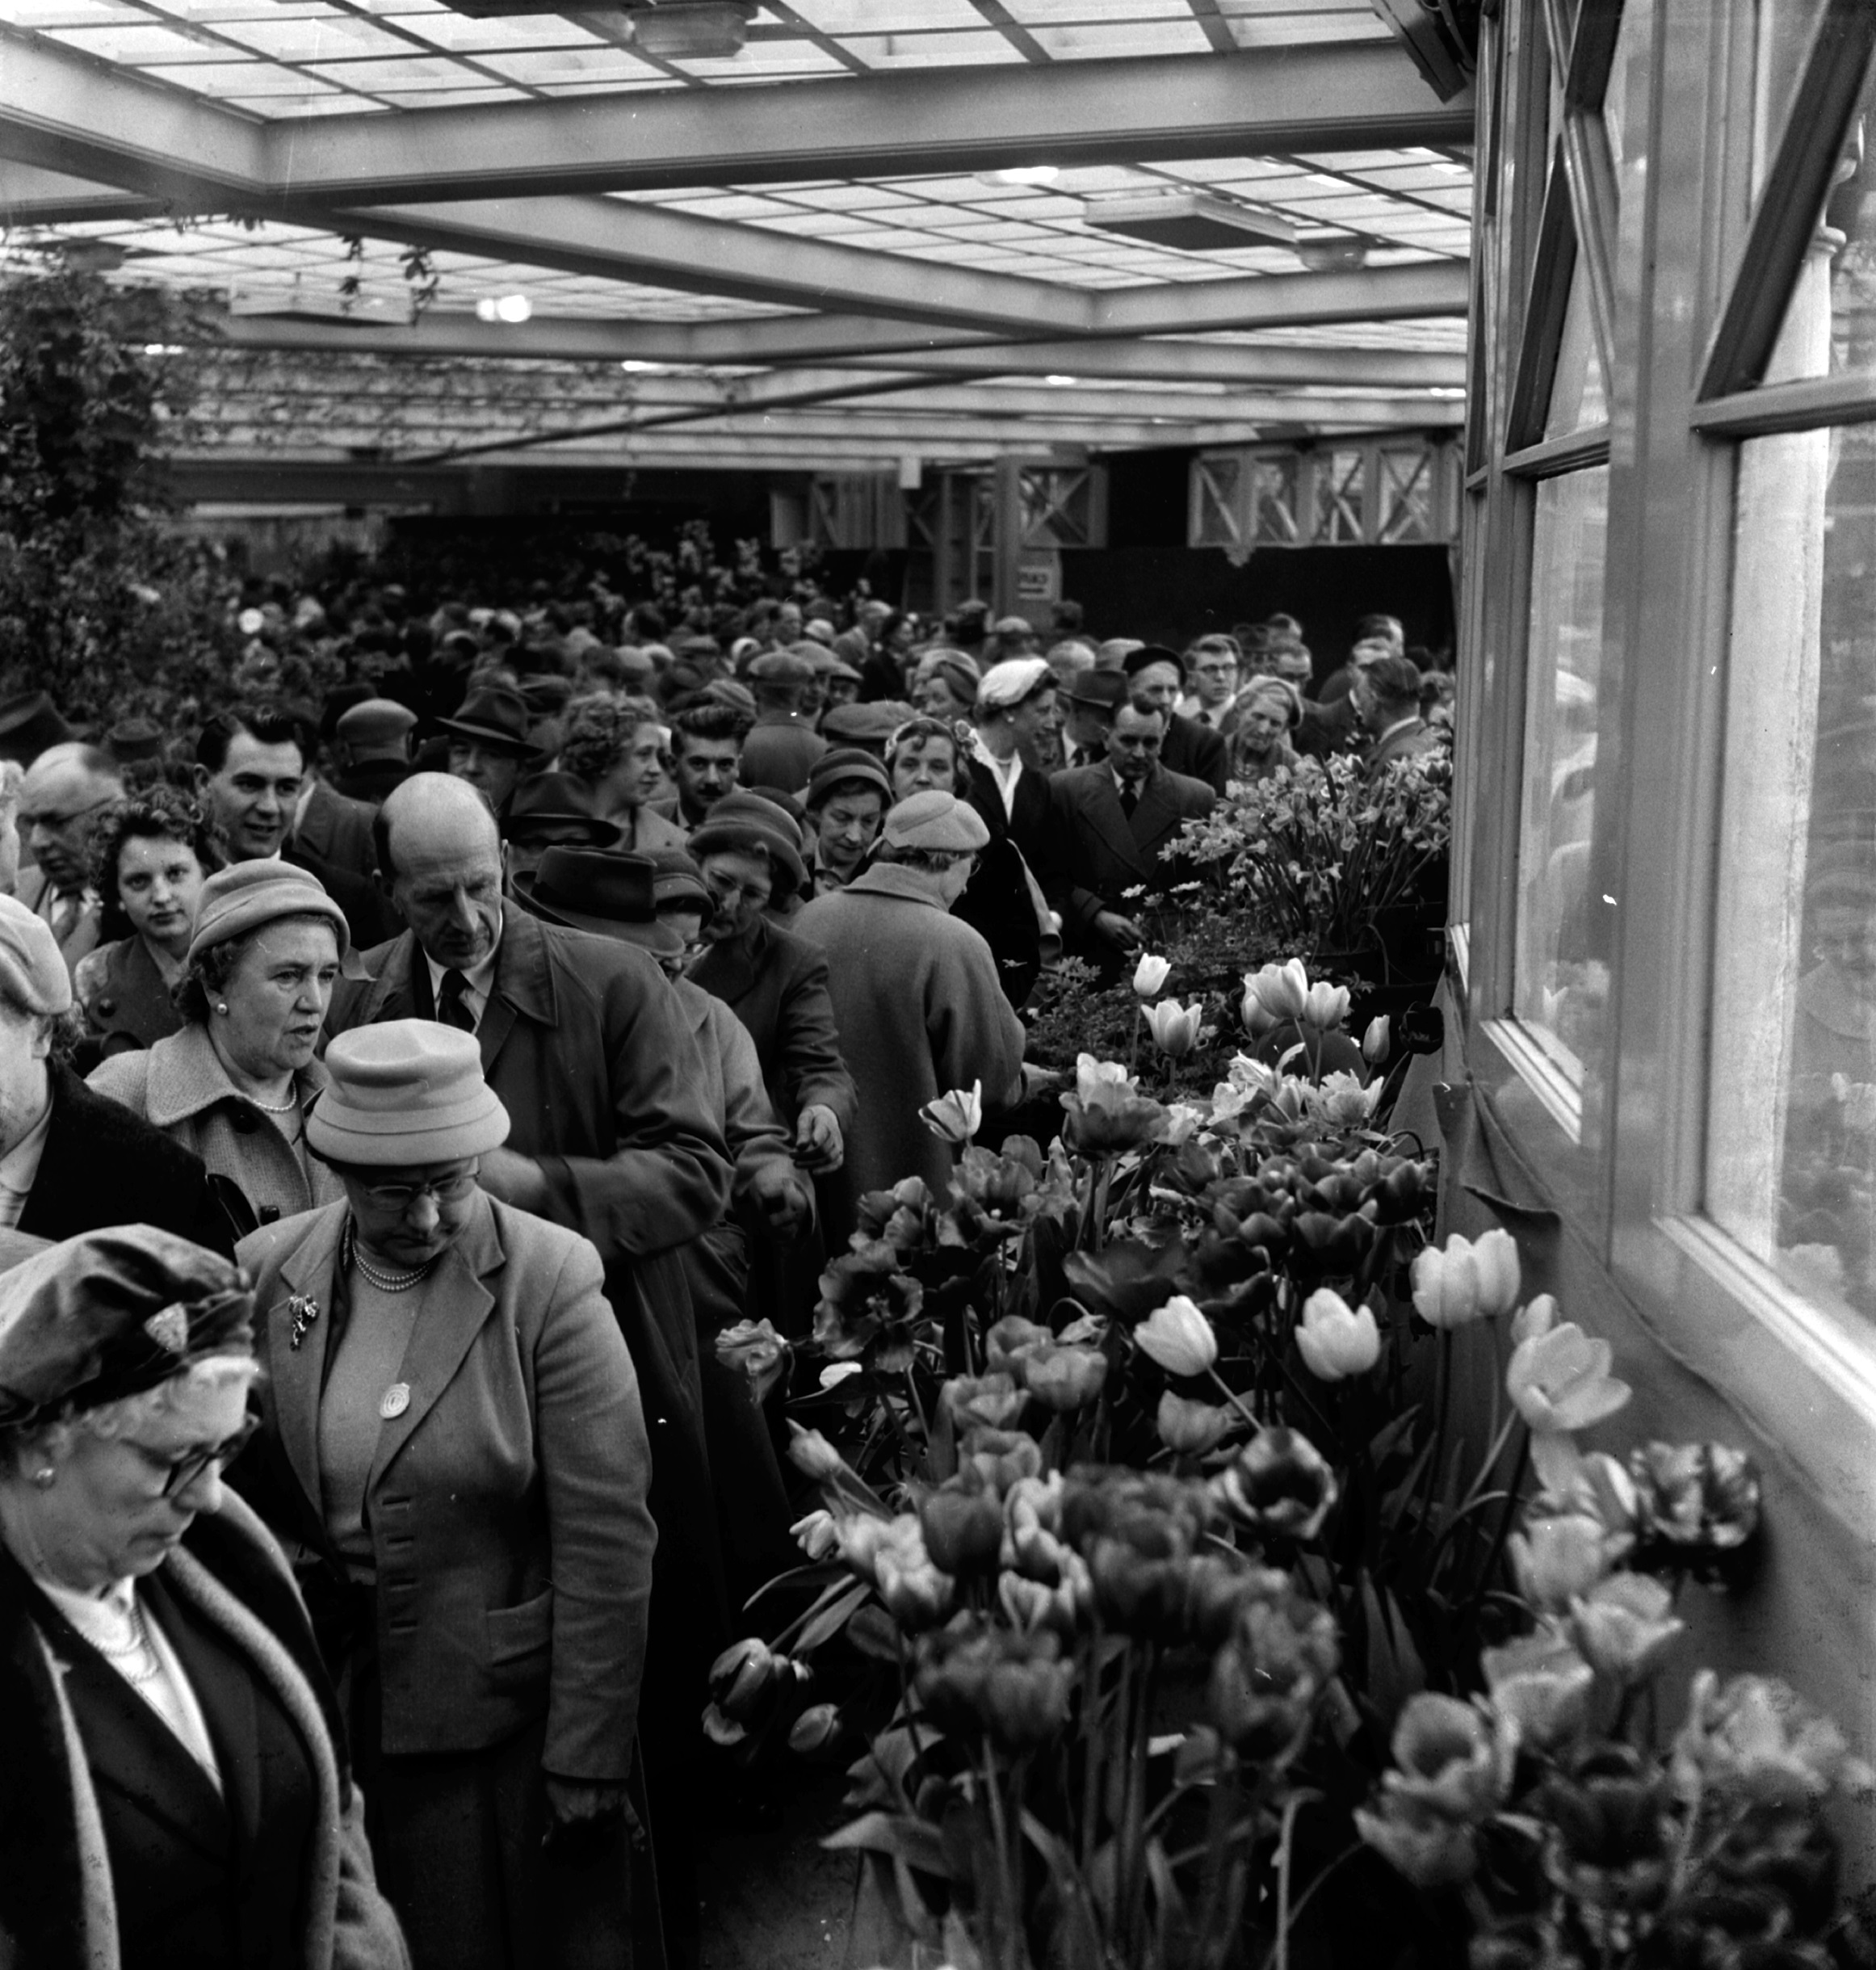 Crowds at the Harrogate Spring Flower Festival in Valley Gardens in 1958, from the Bertram Unné photographic collection.